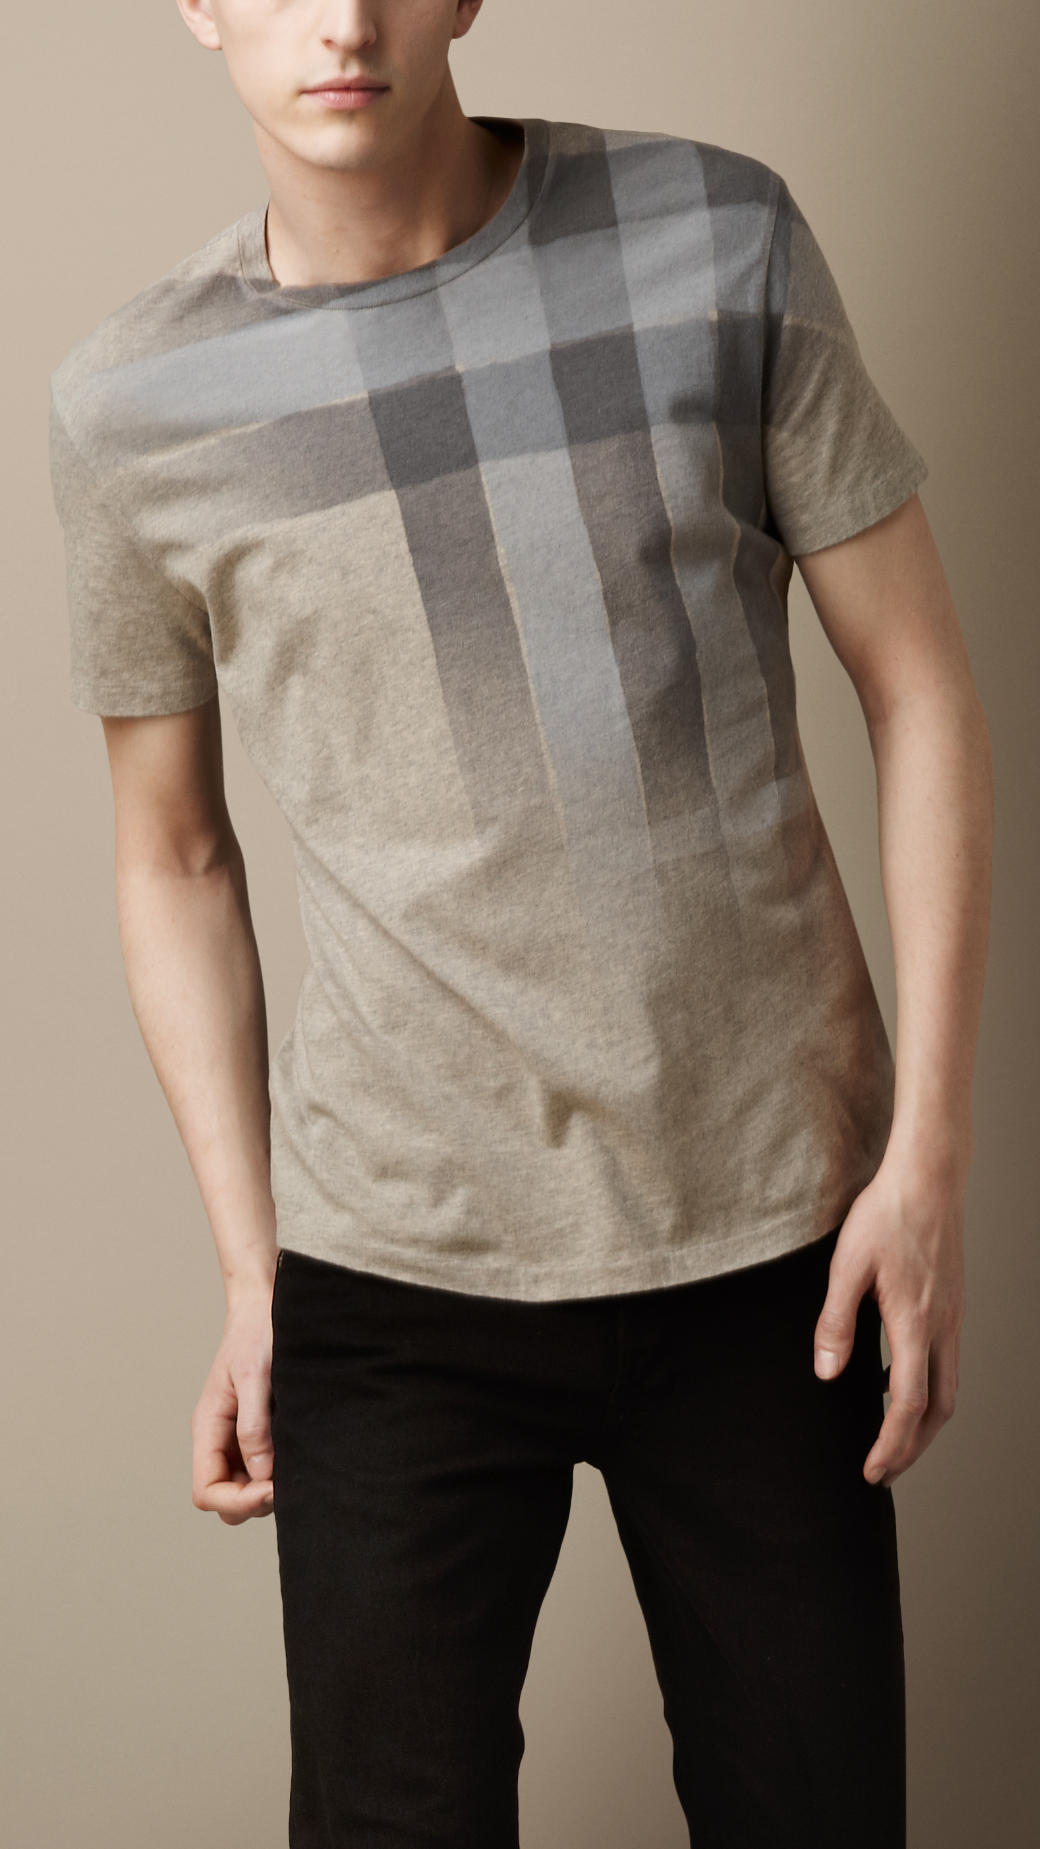 Lyst - Burberry Check Print T-Shirt in Natural for Men